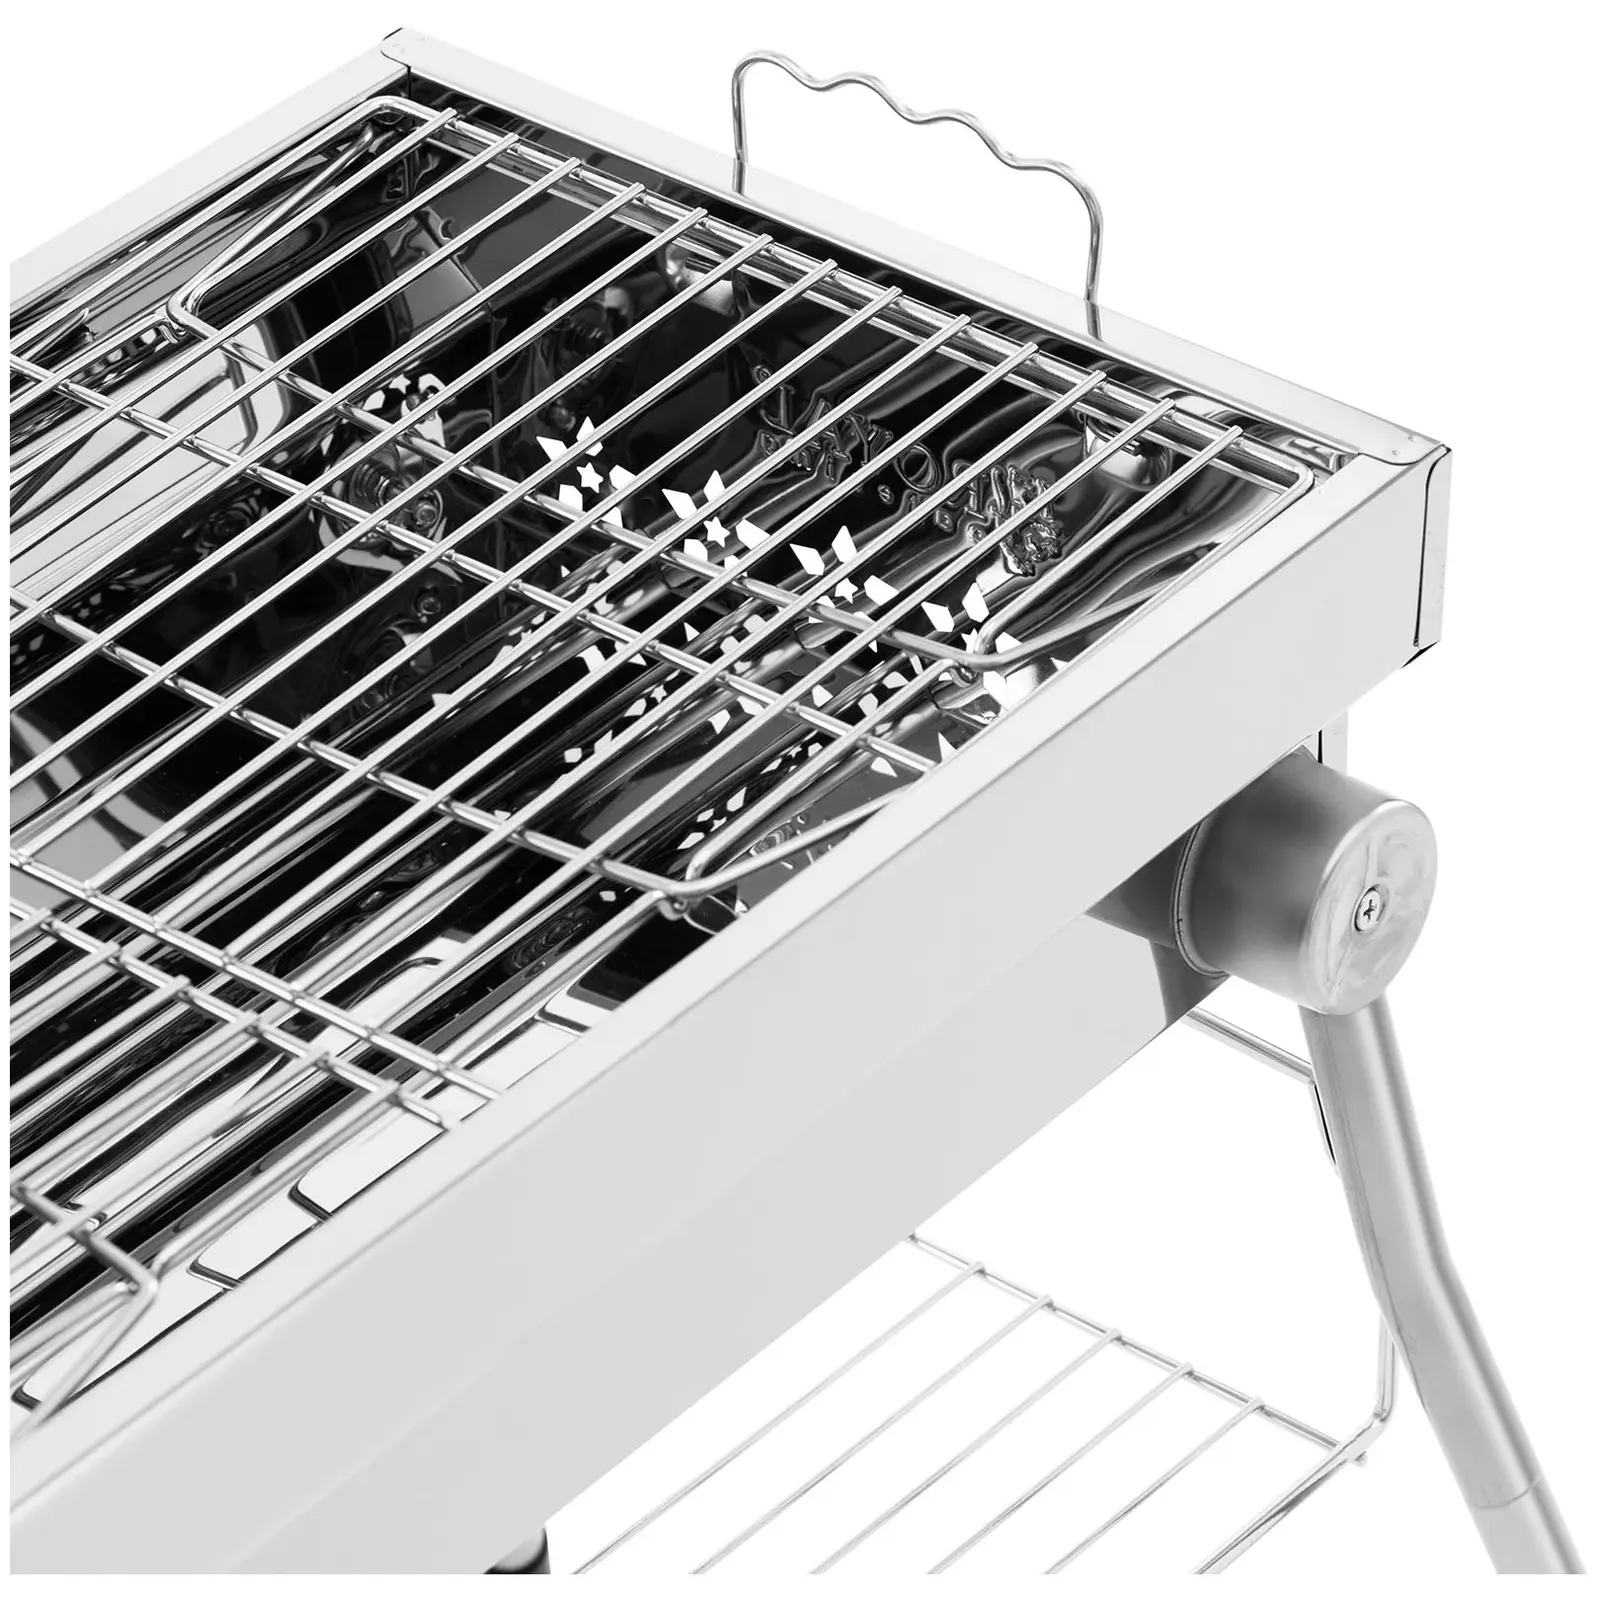 Charcoal grill - Shelf - folding grill - 53 x 26 cm - stainless steel / steel - Royal Catering